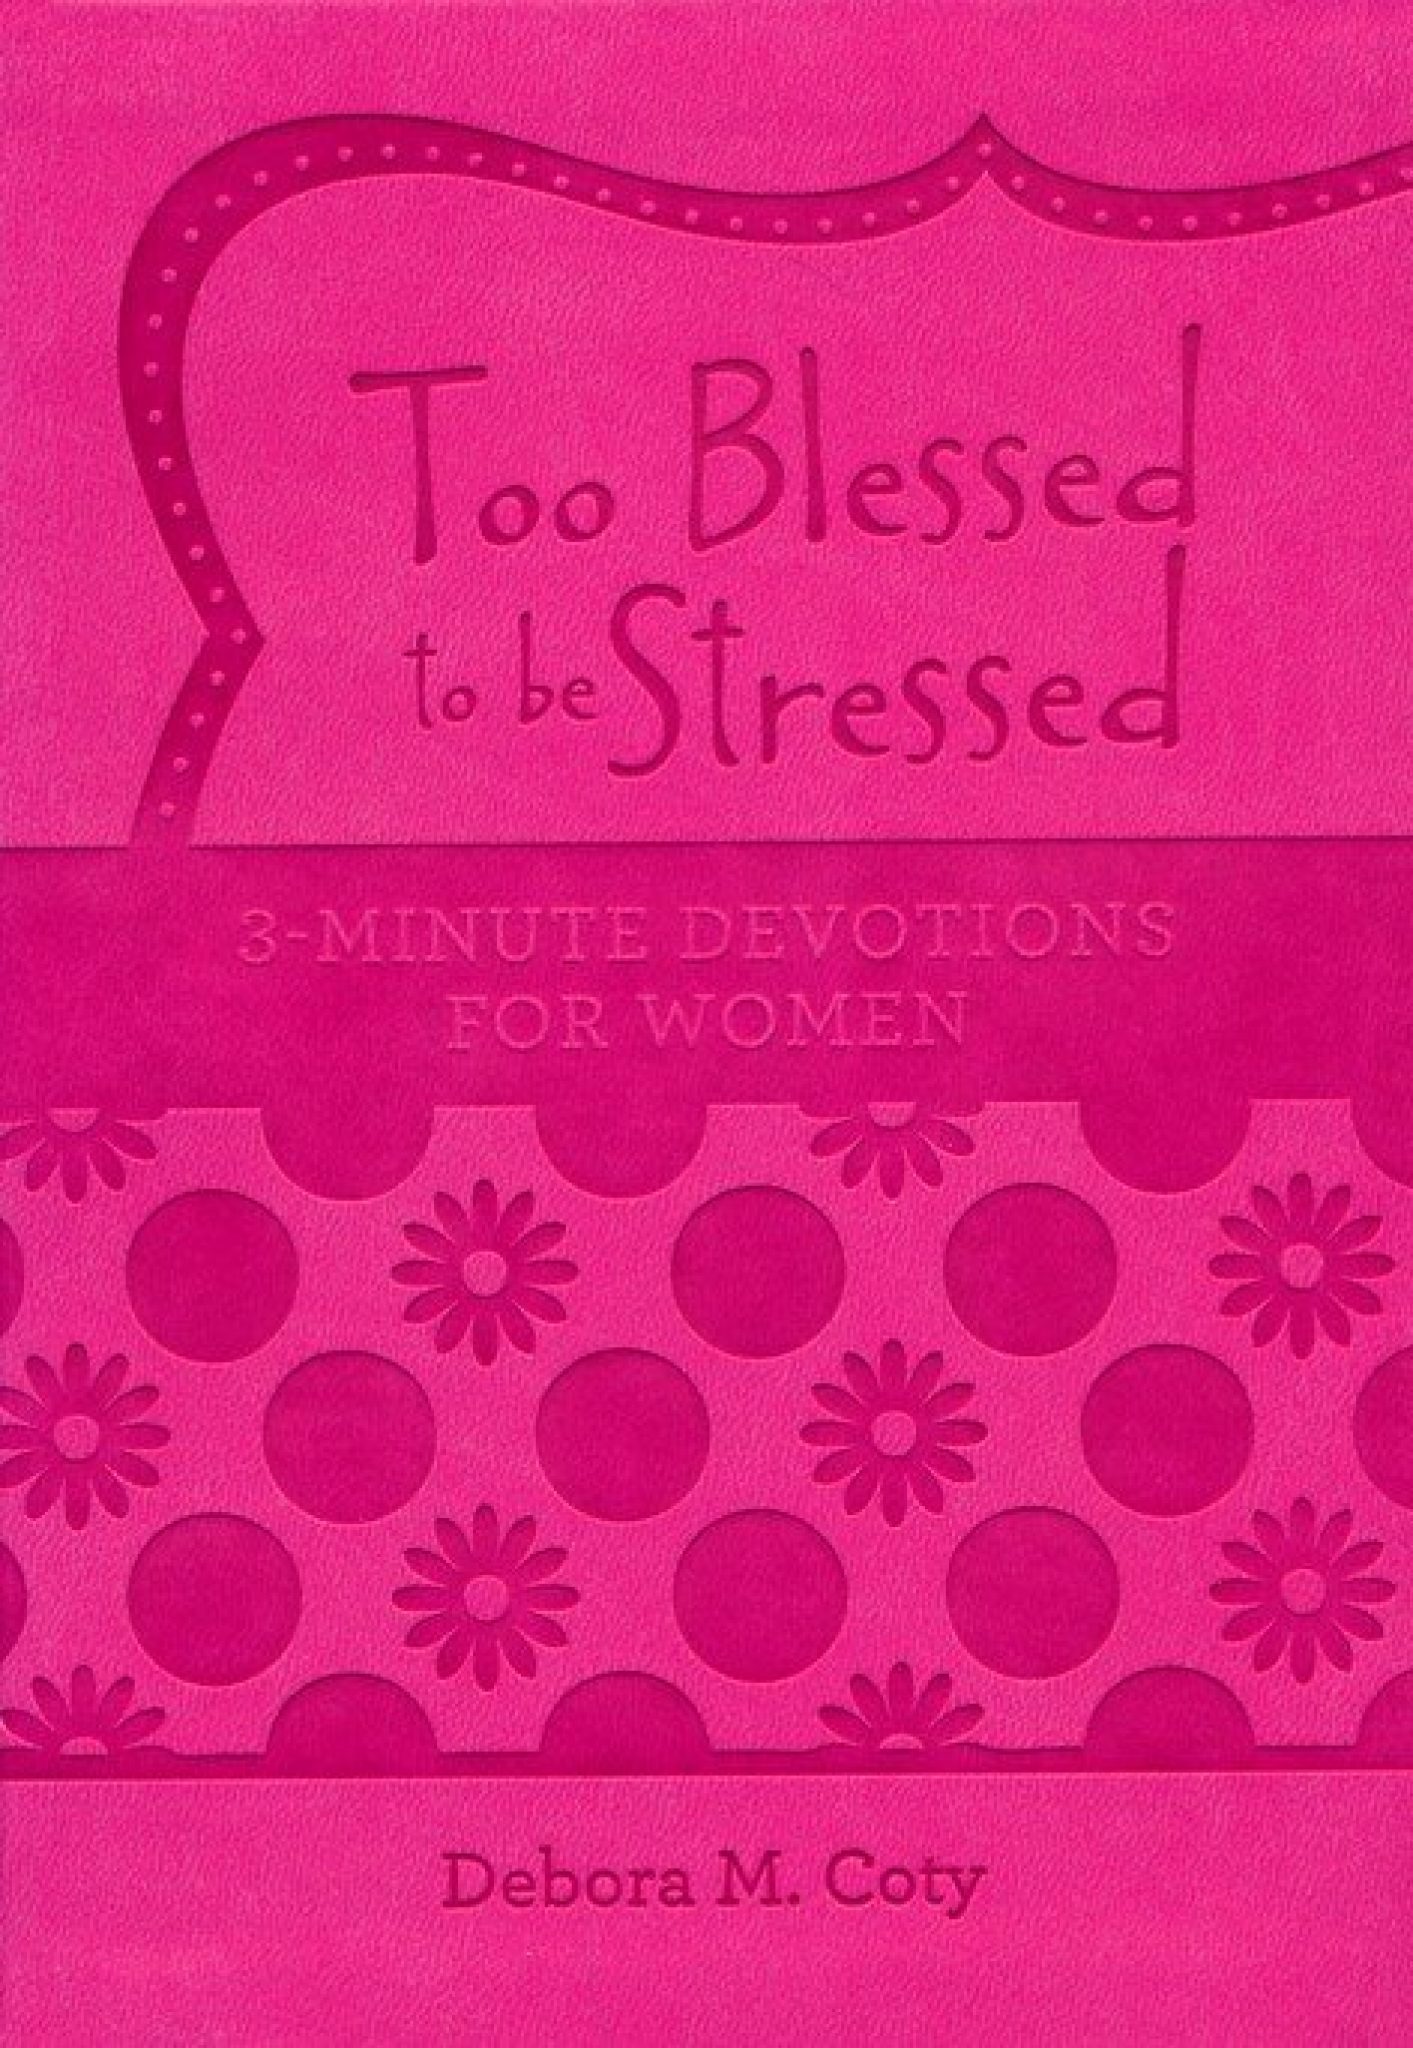 too blessed to be stressed 3 minute devotions for women